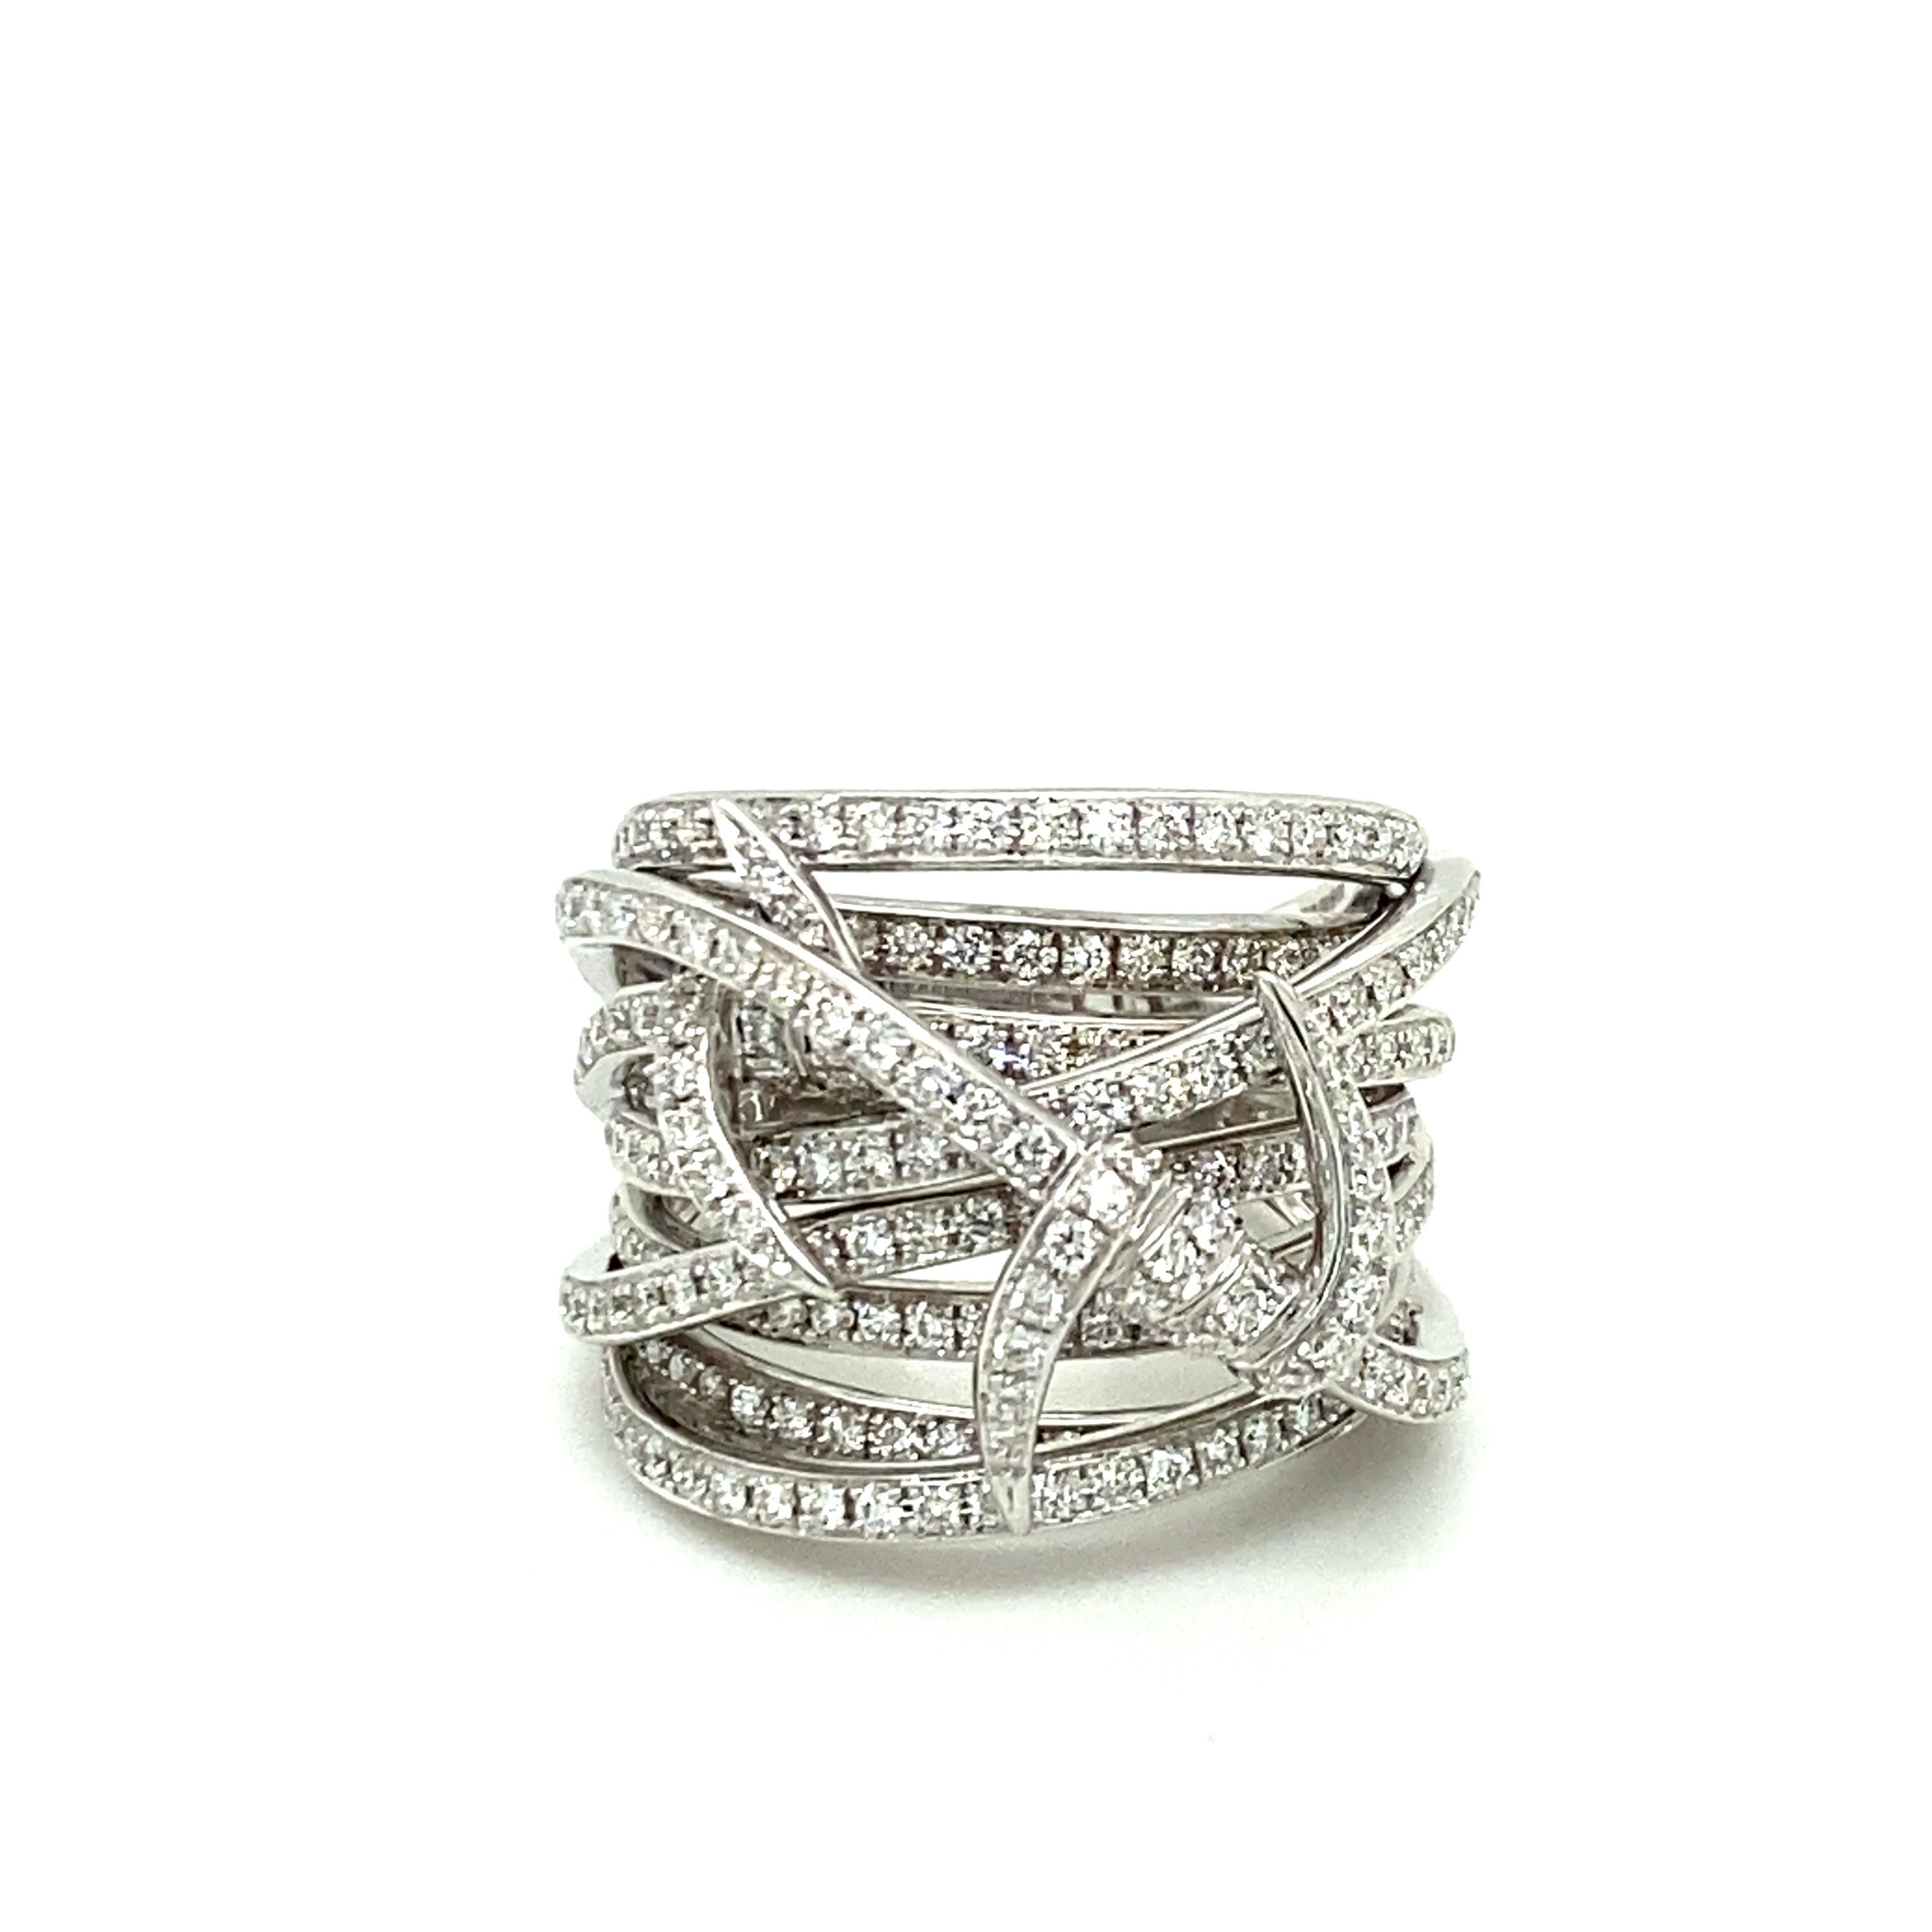 This stunning ring from the Thorn series by renowned British jeweller Stephen Webster captivates with its bold design in a high quality finish. A fine band of 18 karat white gold seems to wrap around the finger and ends in knotted thorn-like ends -